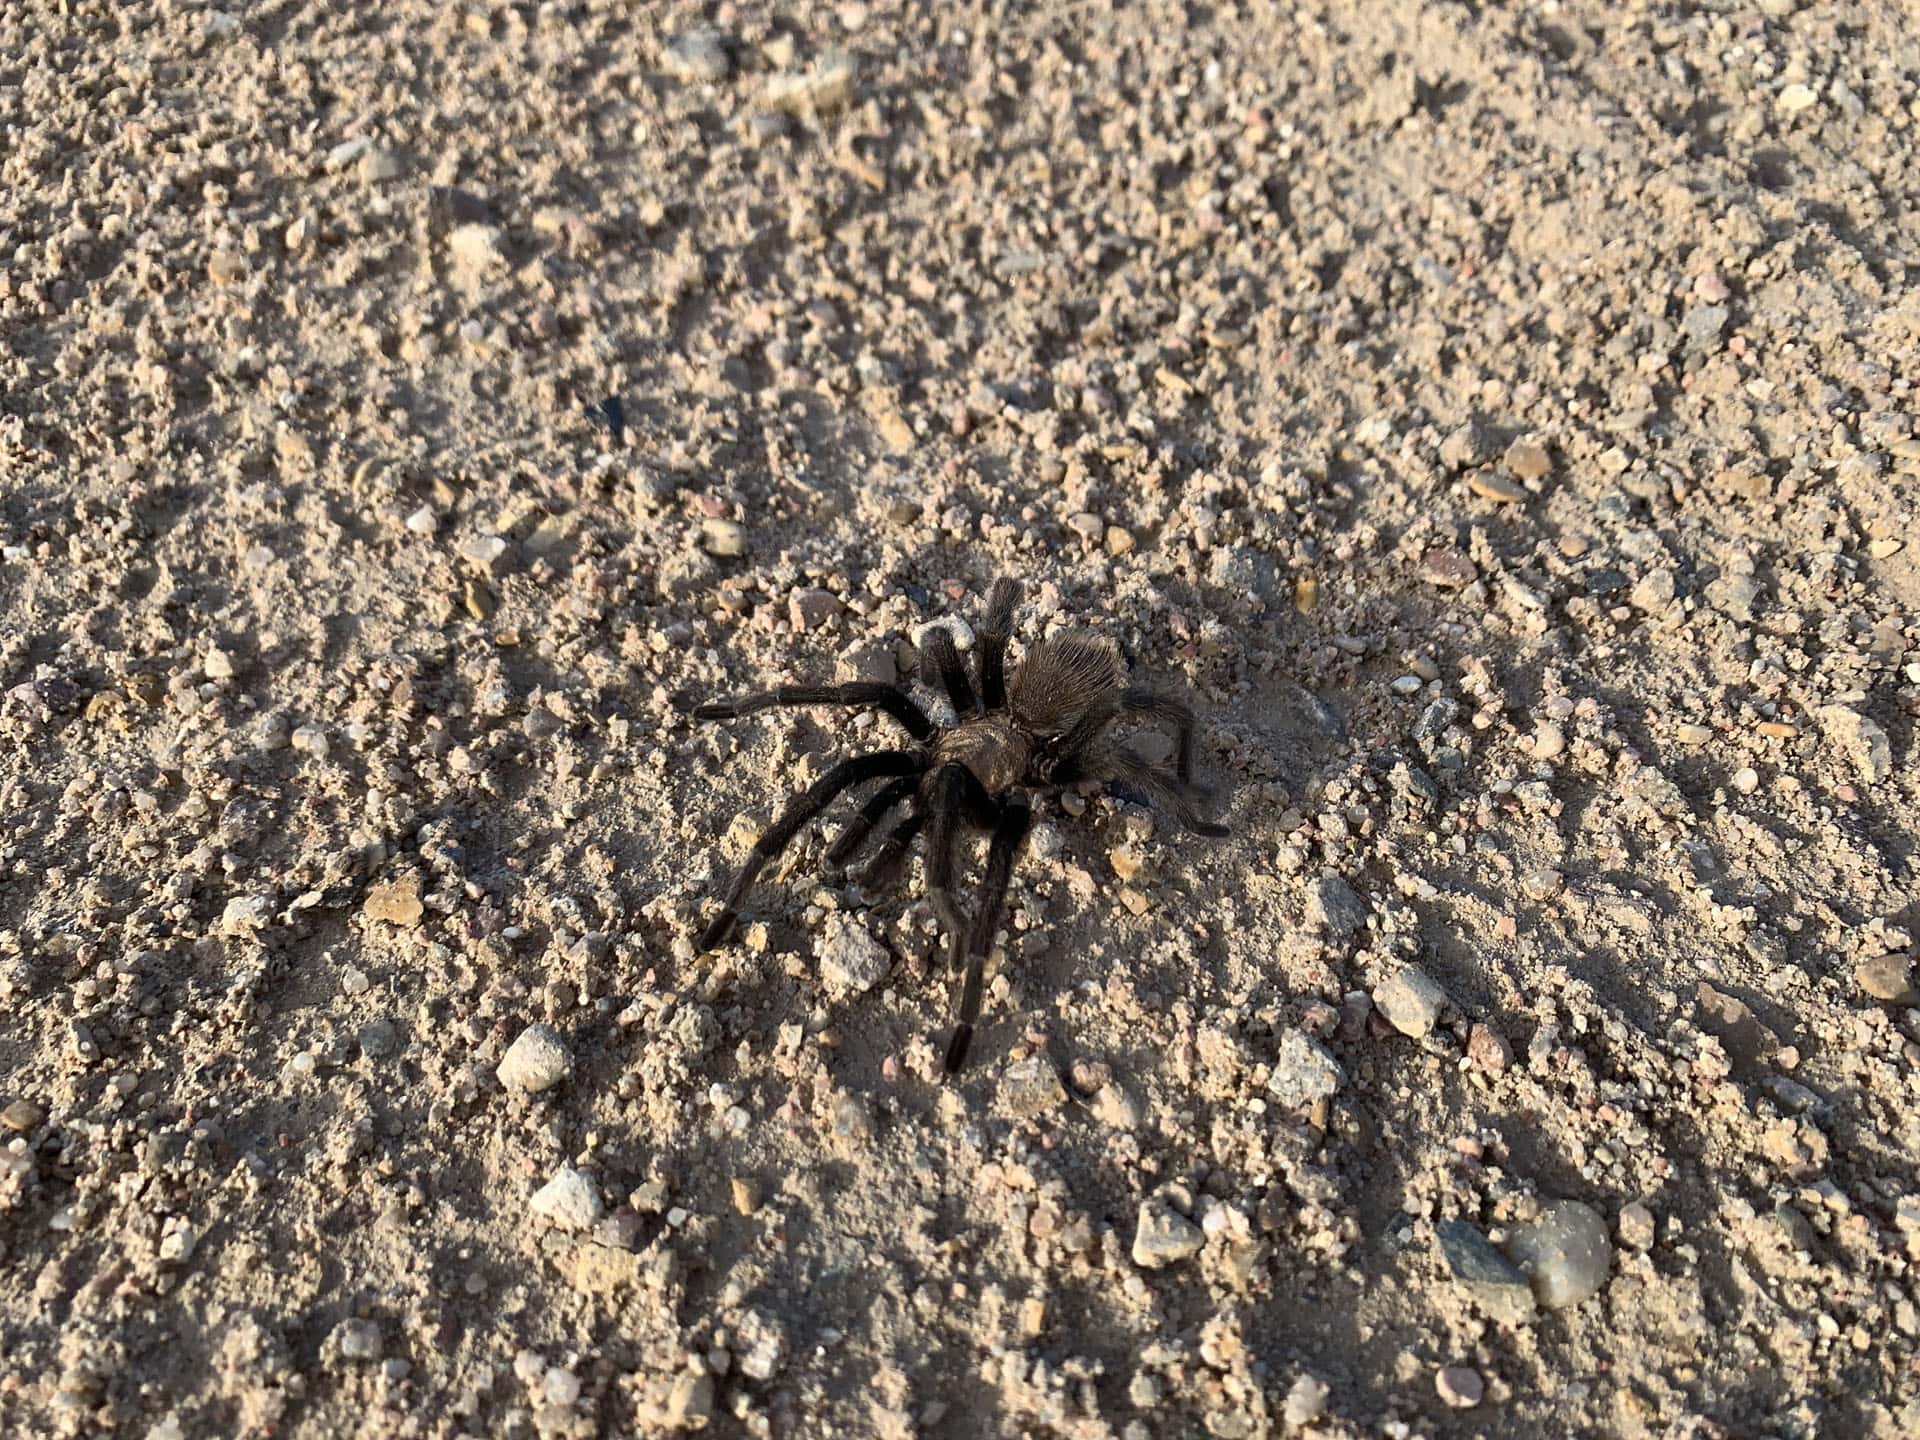 A black and brown spider on the ground at Comanche National Grasslands.